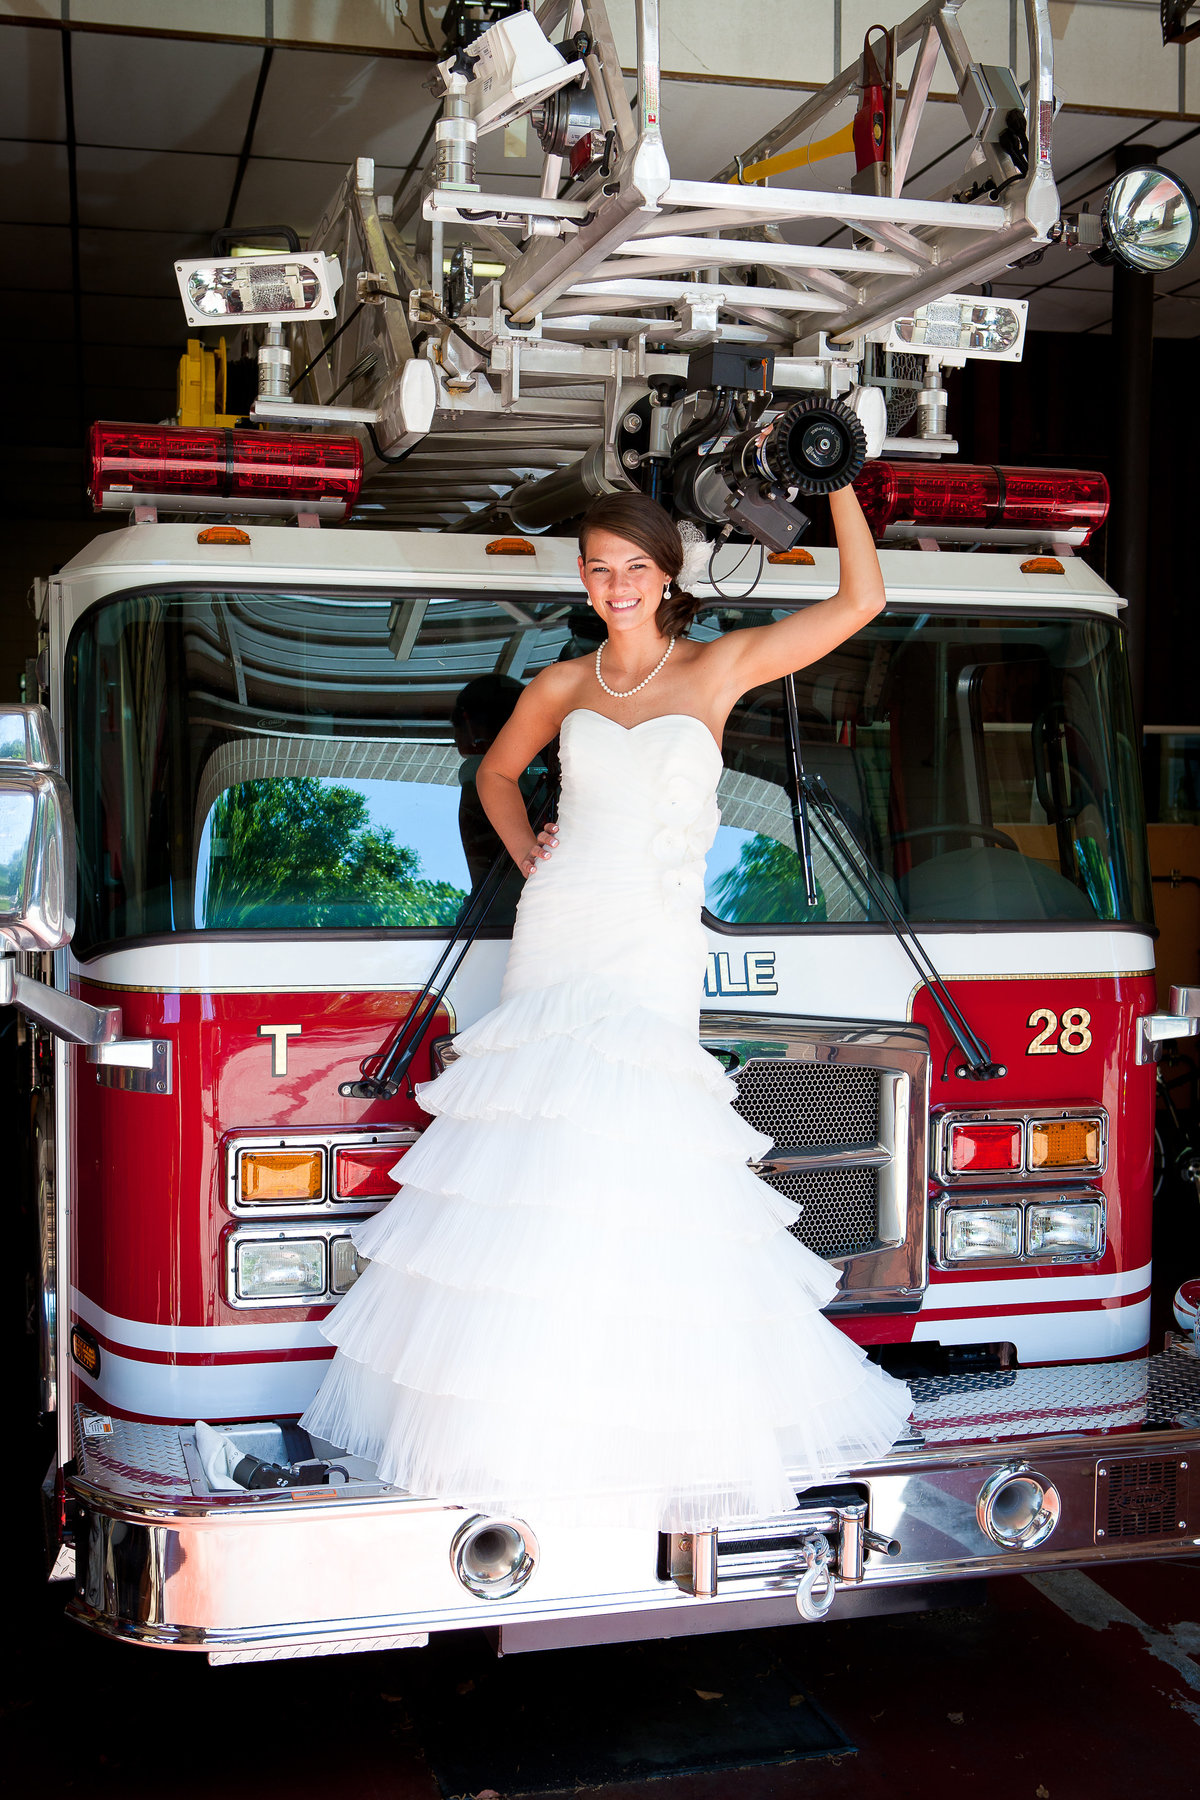 The bride was marrying a fireman so she decided to do her bridals at a fire station in midtown Mobile, Alabama.